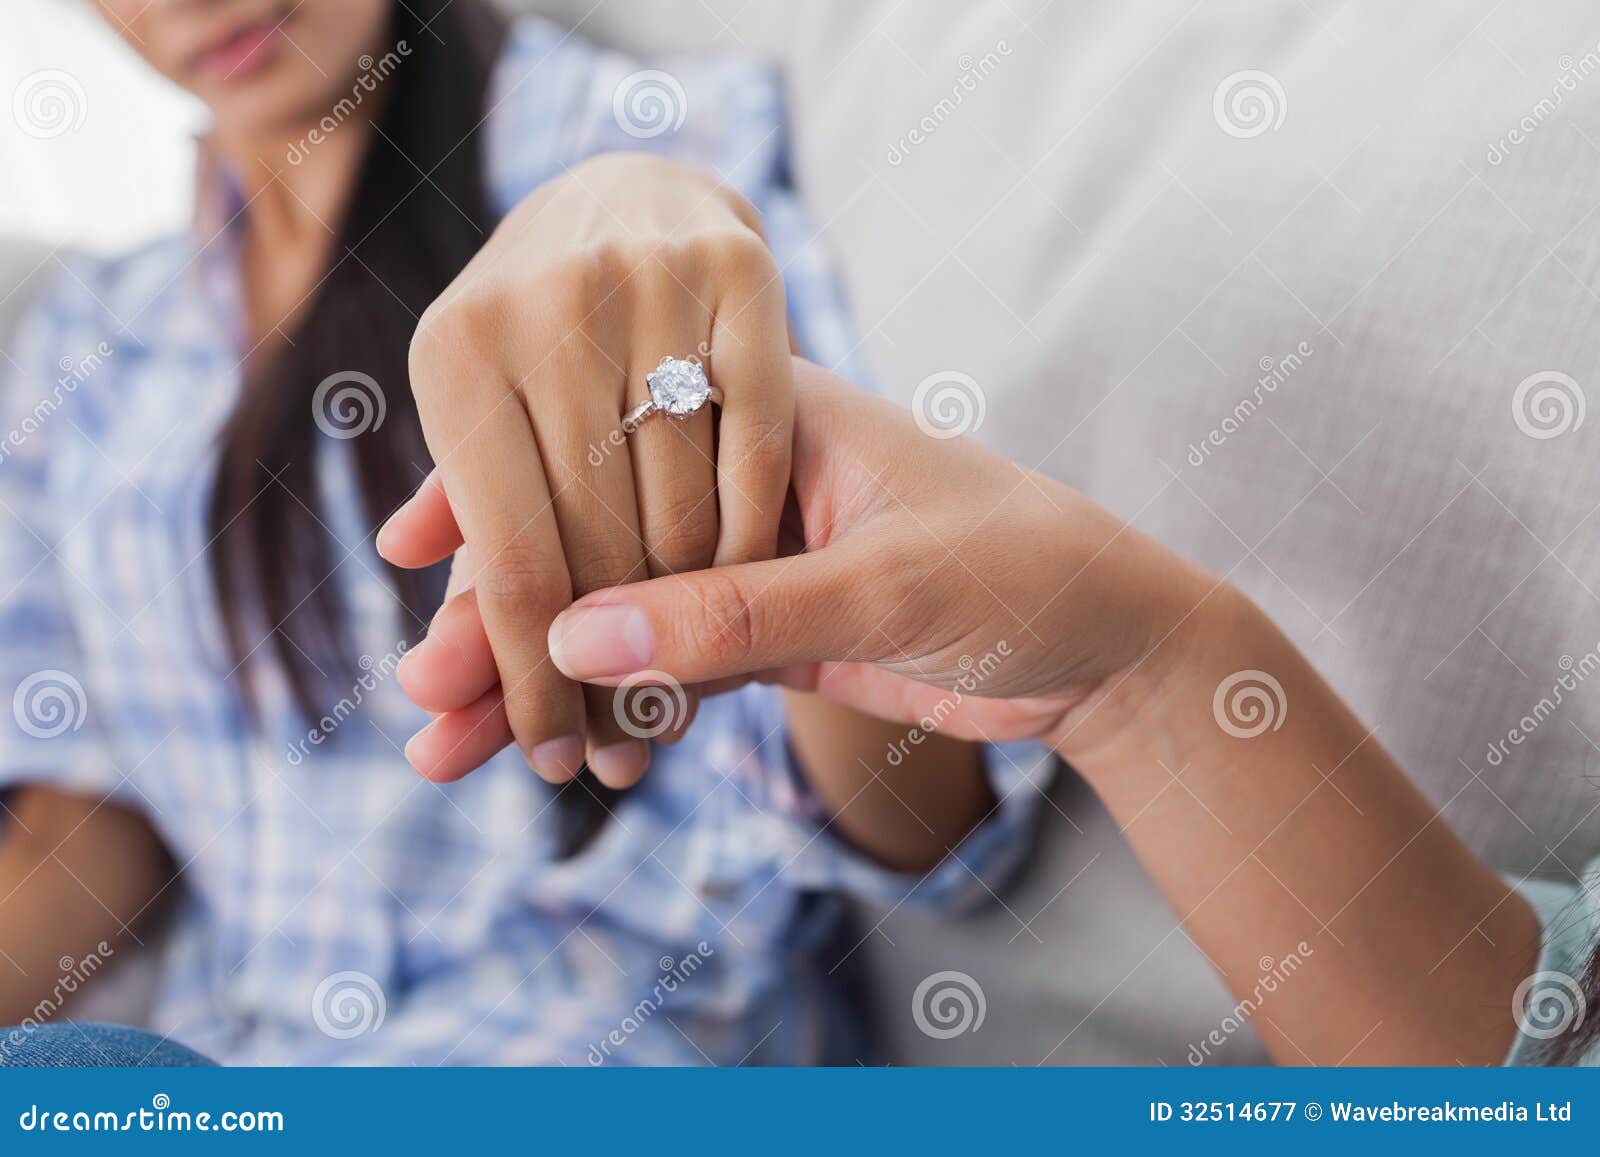 engagement ring on womans hand